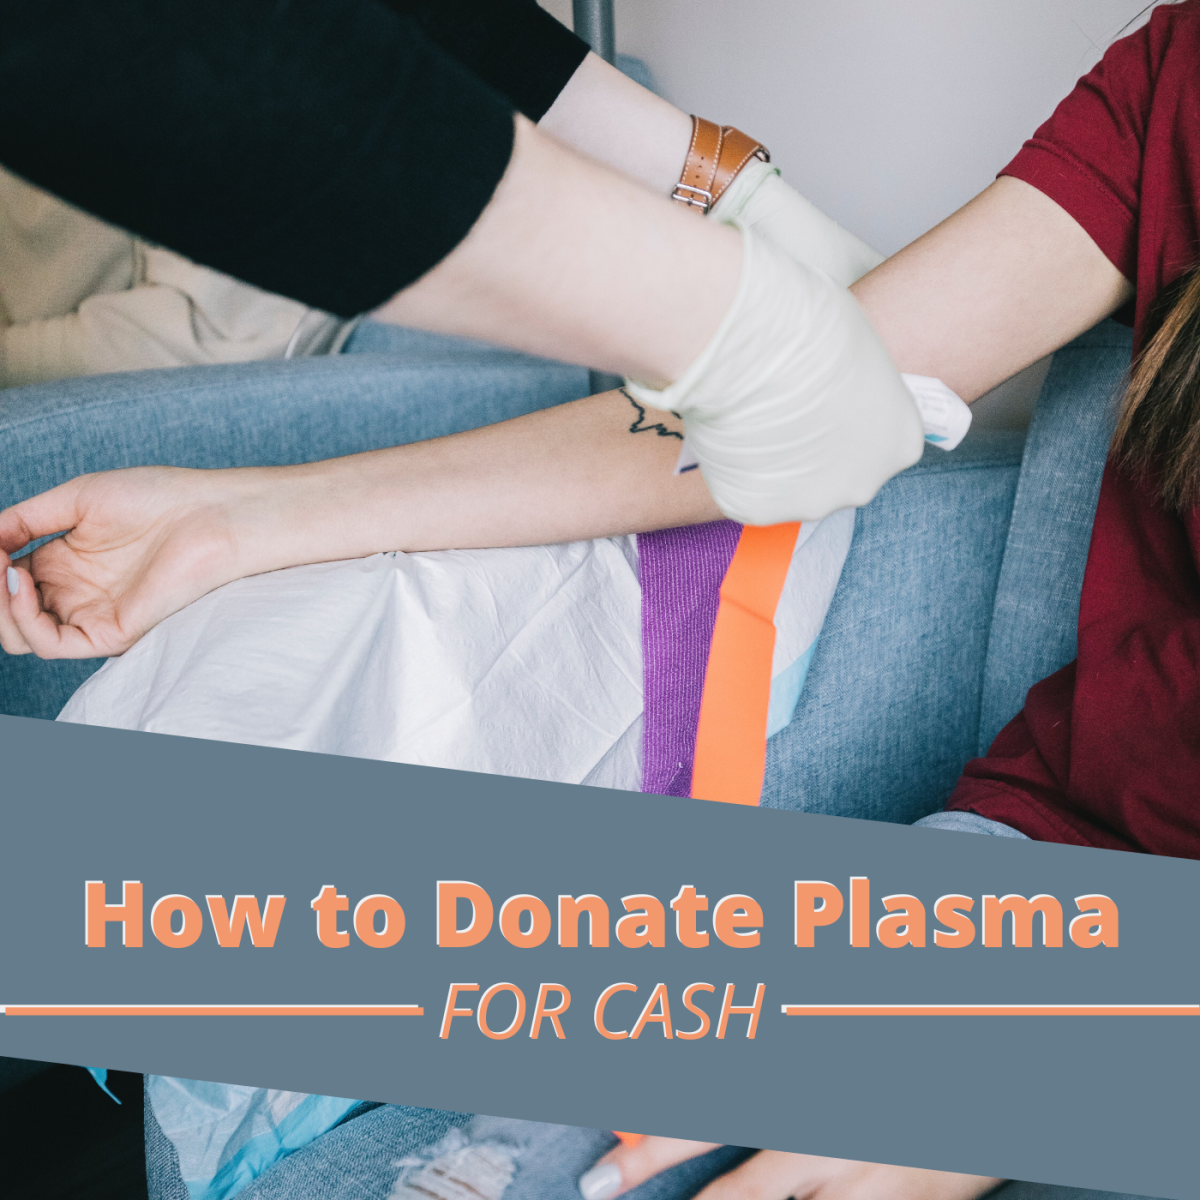 Did you know you can earn up to $300 per month by donating your blood plasma?